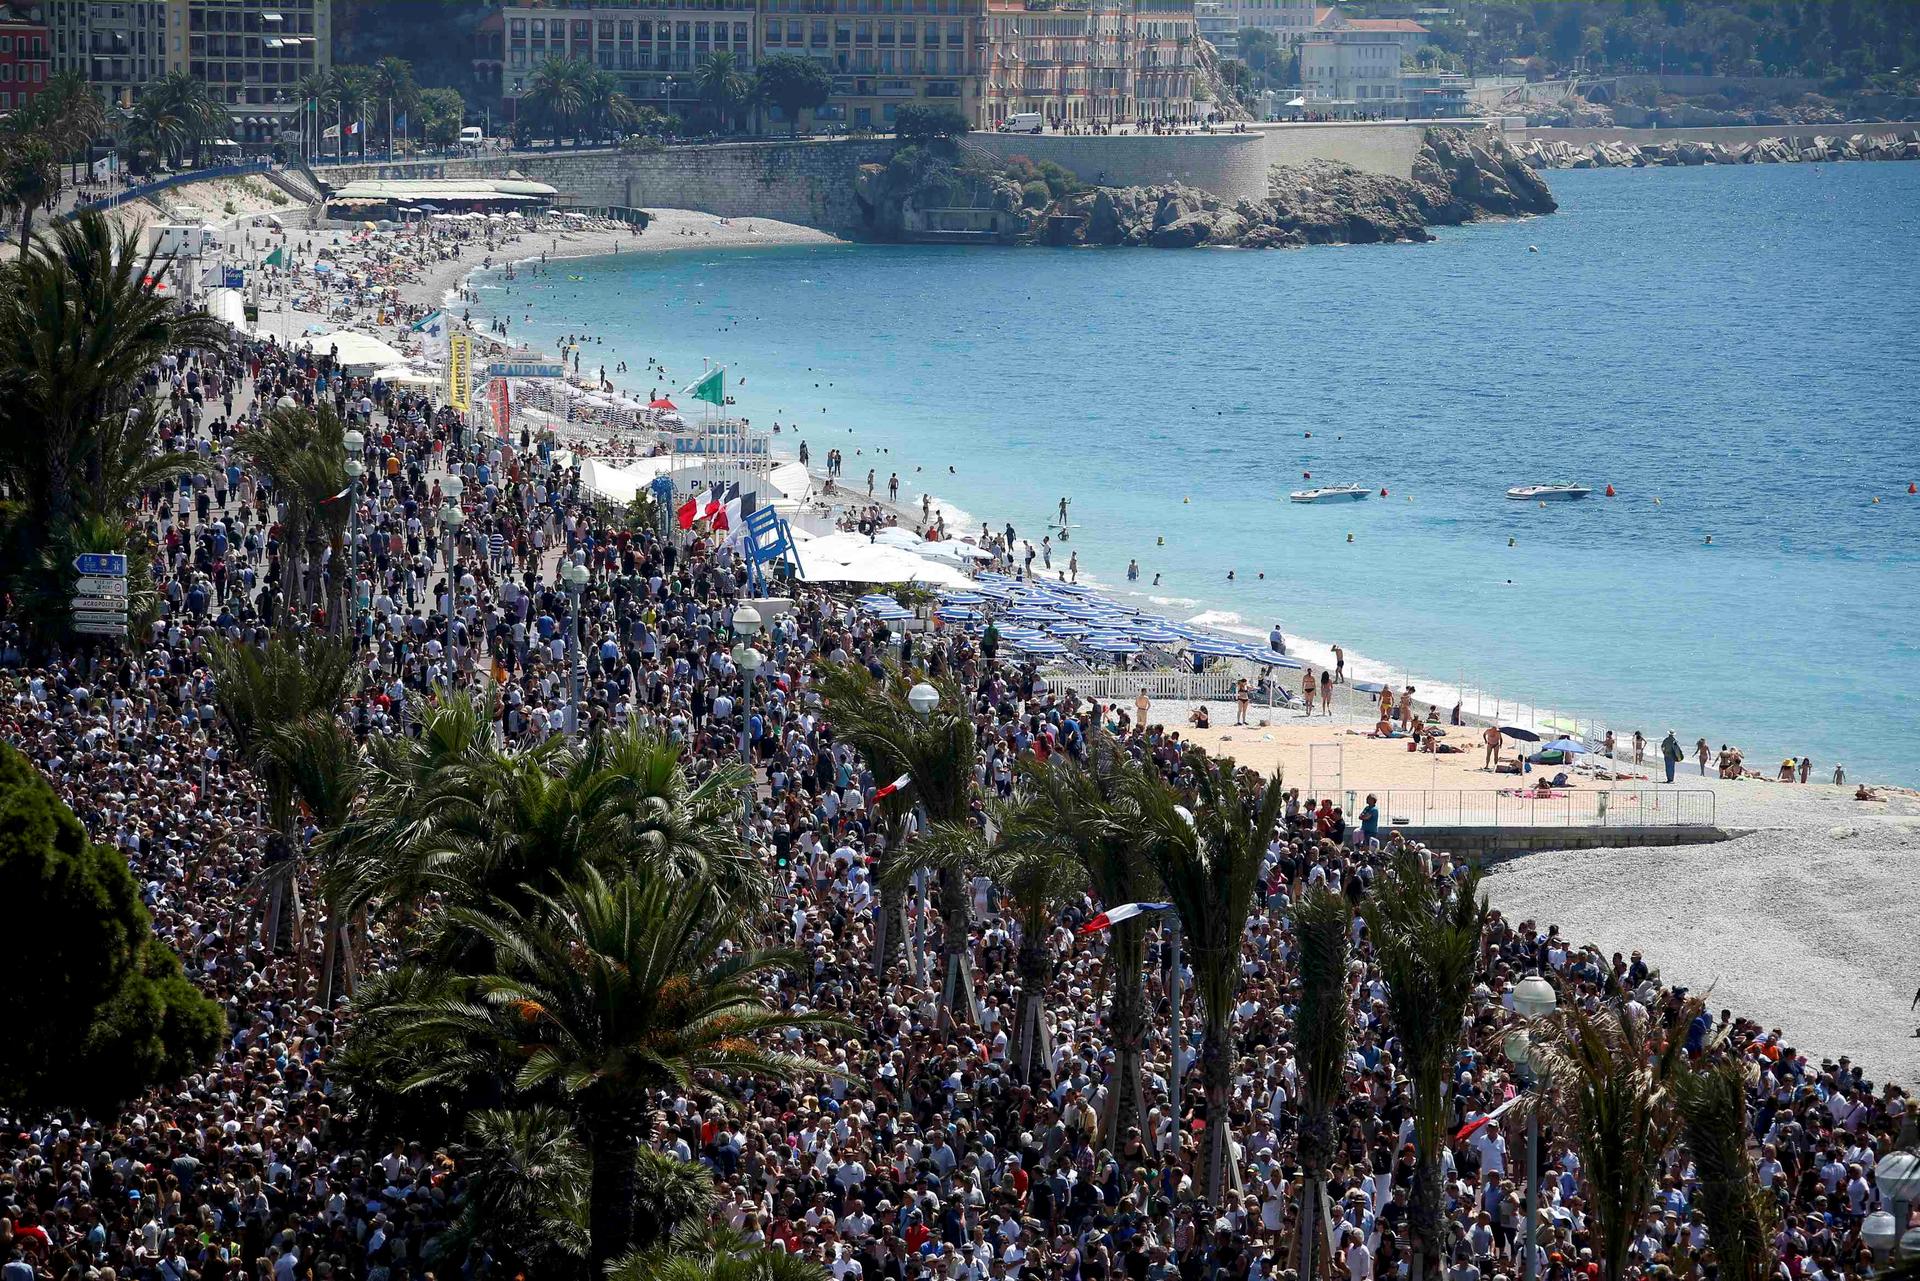 A general view shows the crowd gathering on the Promenade des Anglais during a minute of silence on the third day of national mourning to pay tribute to victims of the truck attack along the Promenade des Anglais on Bastille Day that killed scores and inj